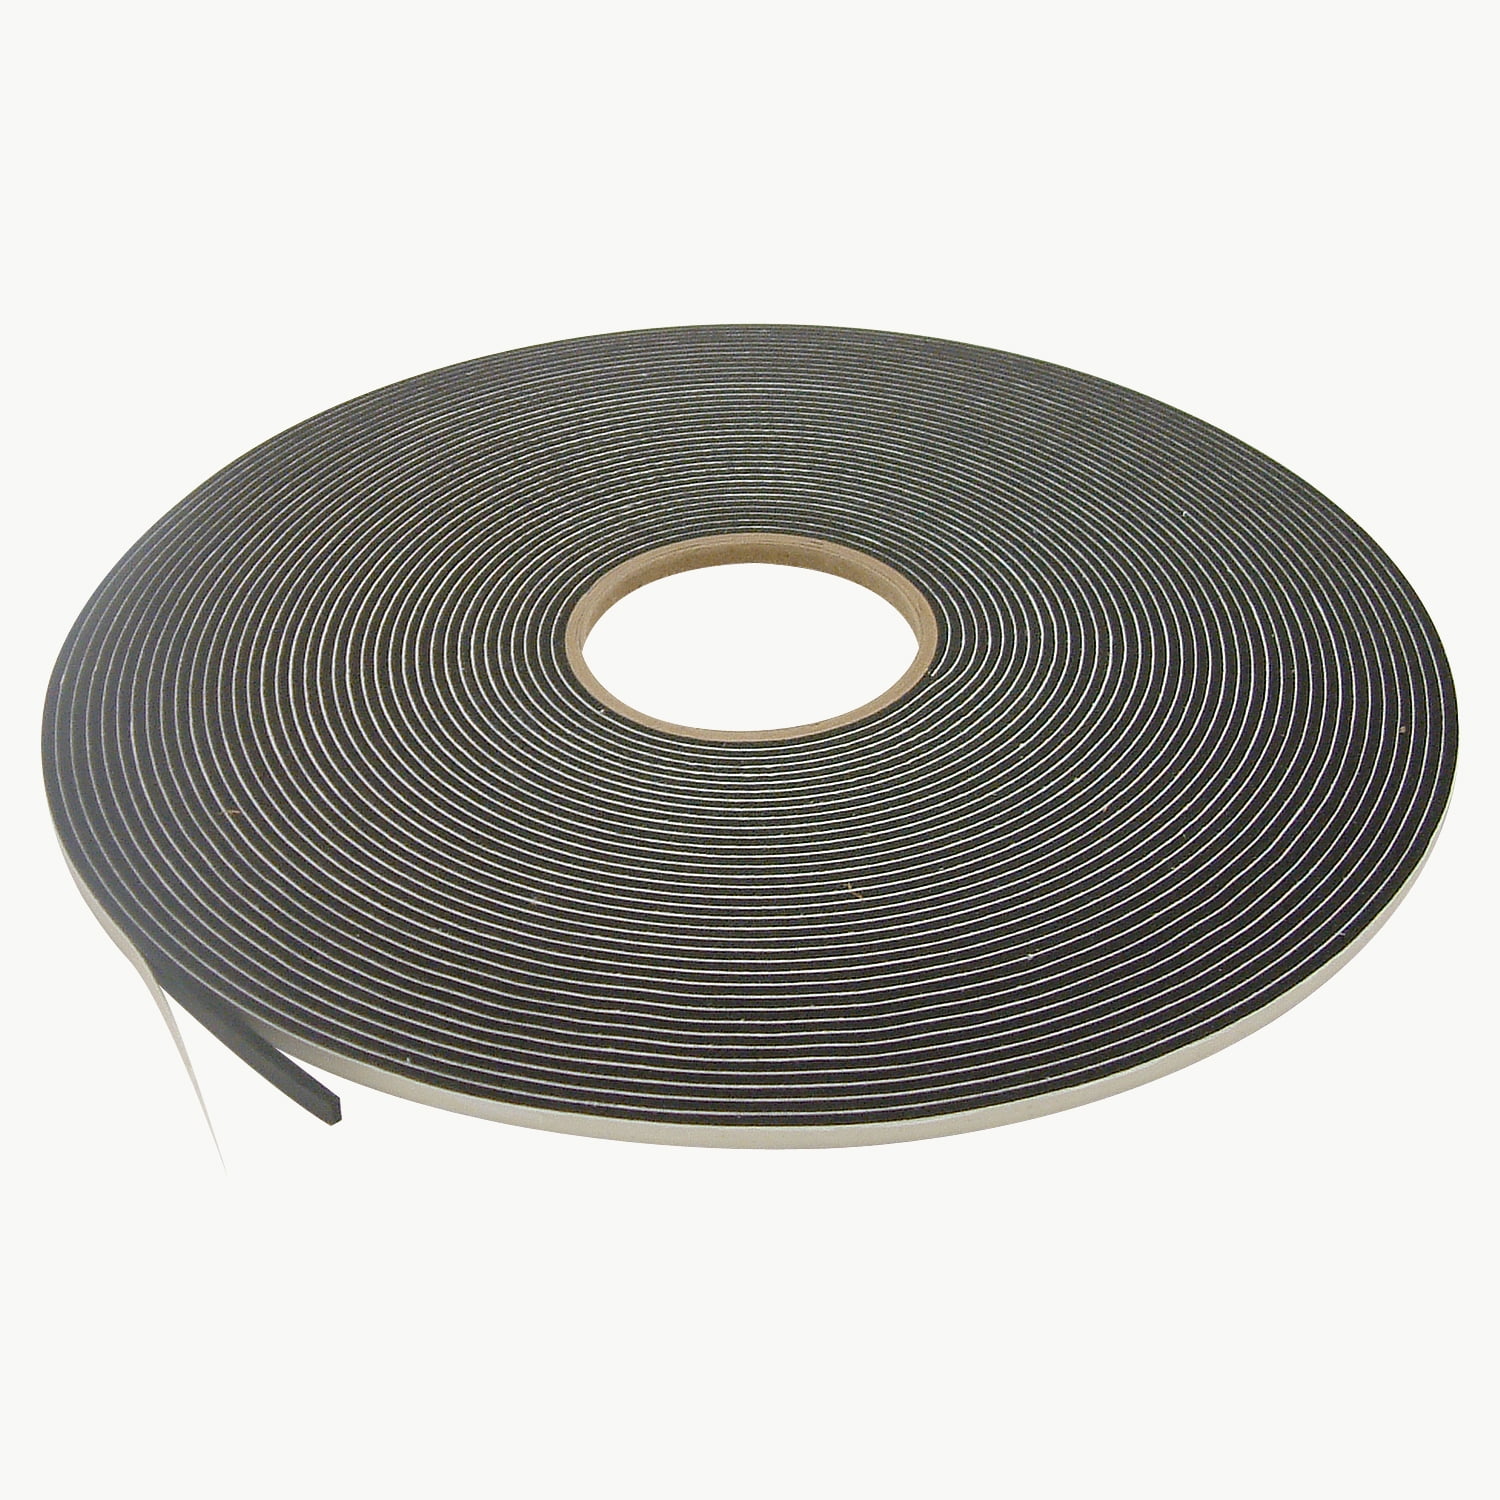 1/4 Thick Black Soft Weatherproof EPDM Foam Strips with Adhesive Back 2  Wide x 10 Ft.